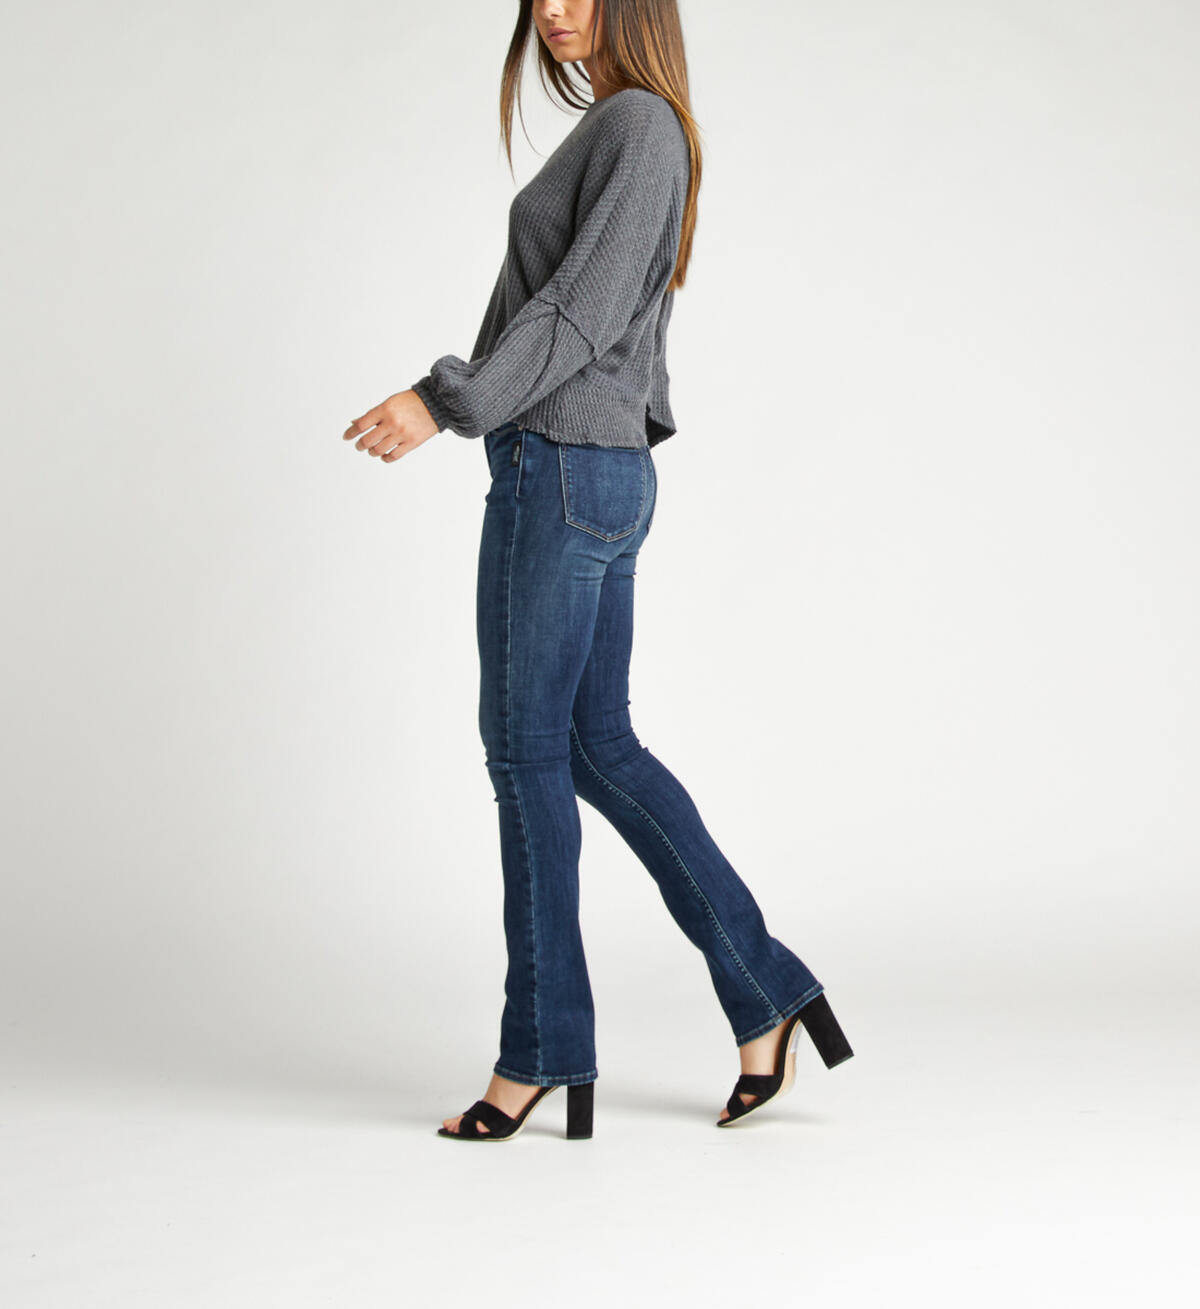 Most Wanted Mid Rise Skinny Bootcut Jeans, , hi-res image number 2